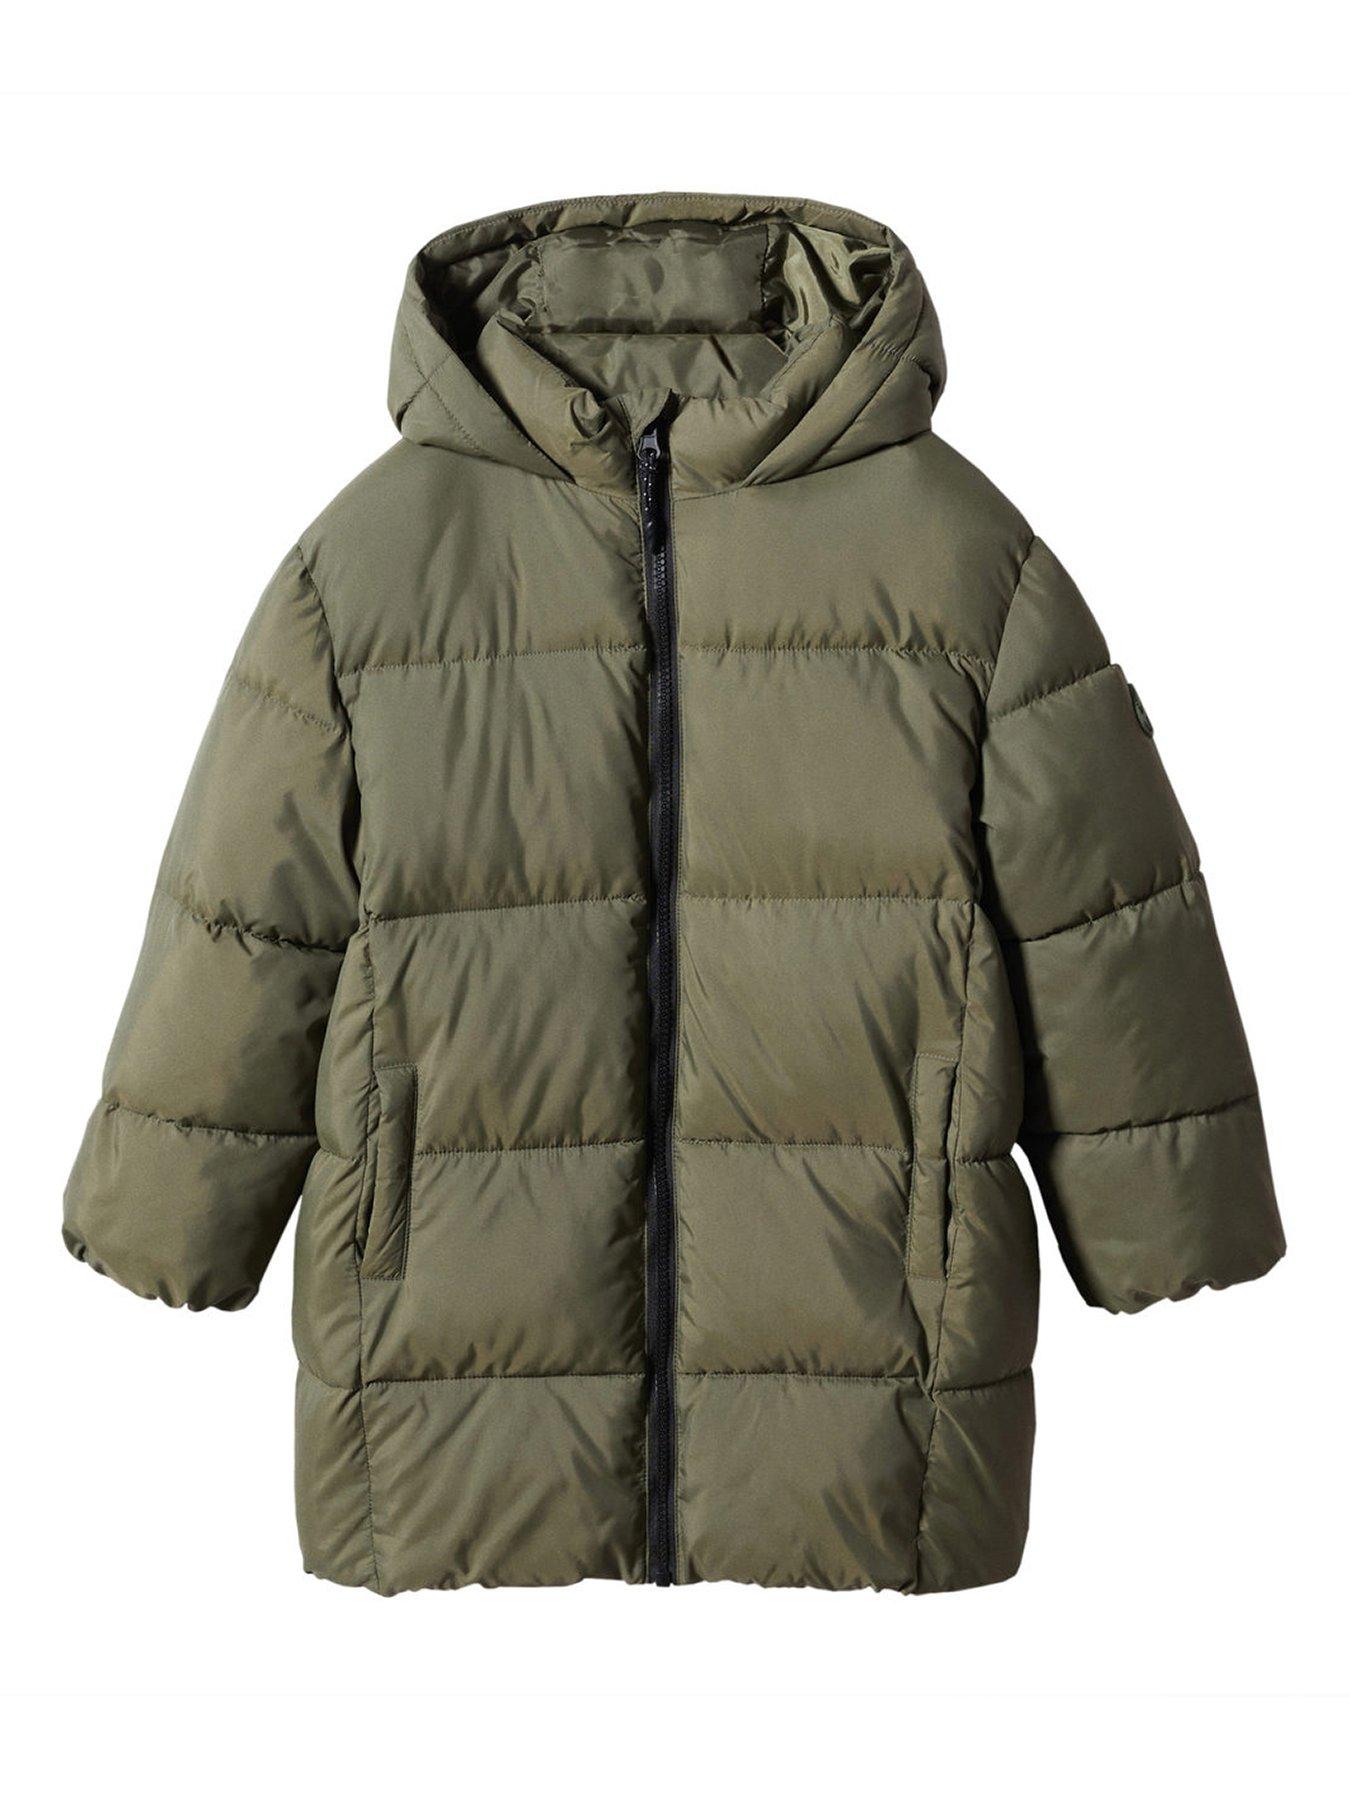 New Look Reversible Quilted Jacket with Borg Inner in Light khaki-Green